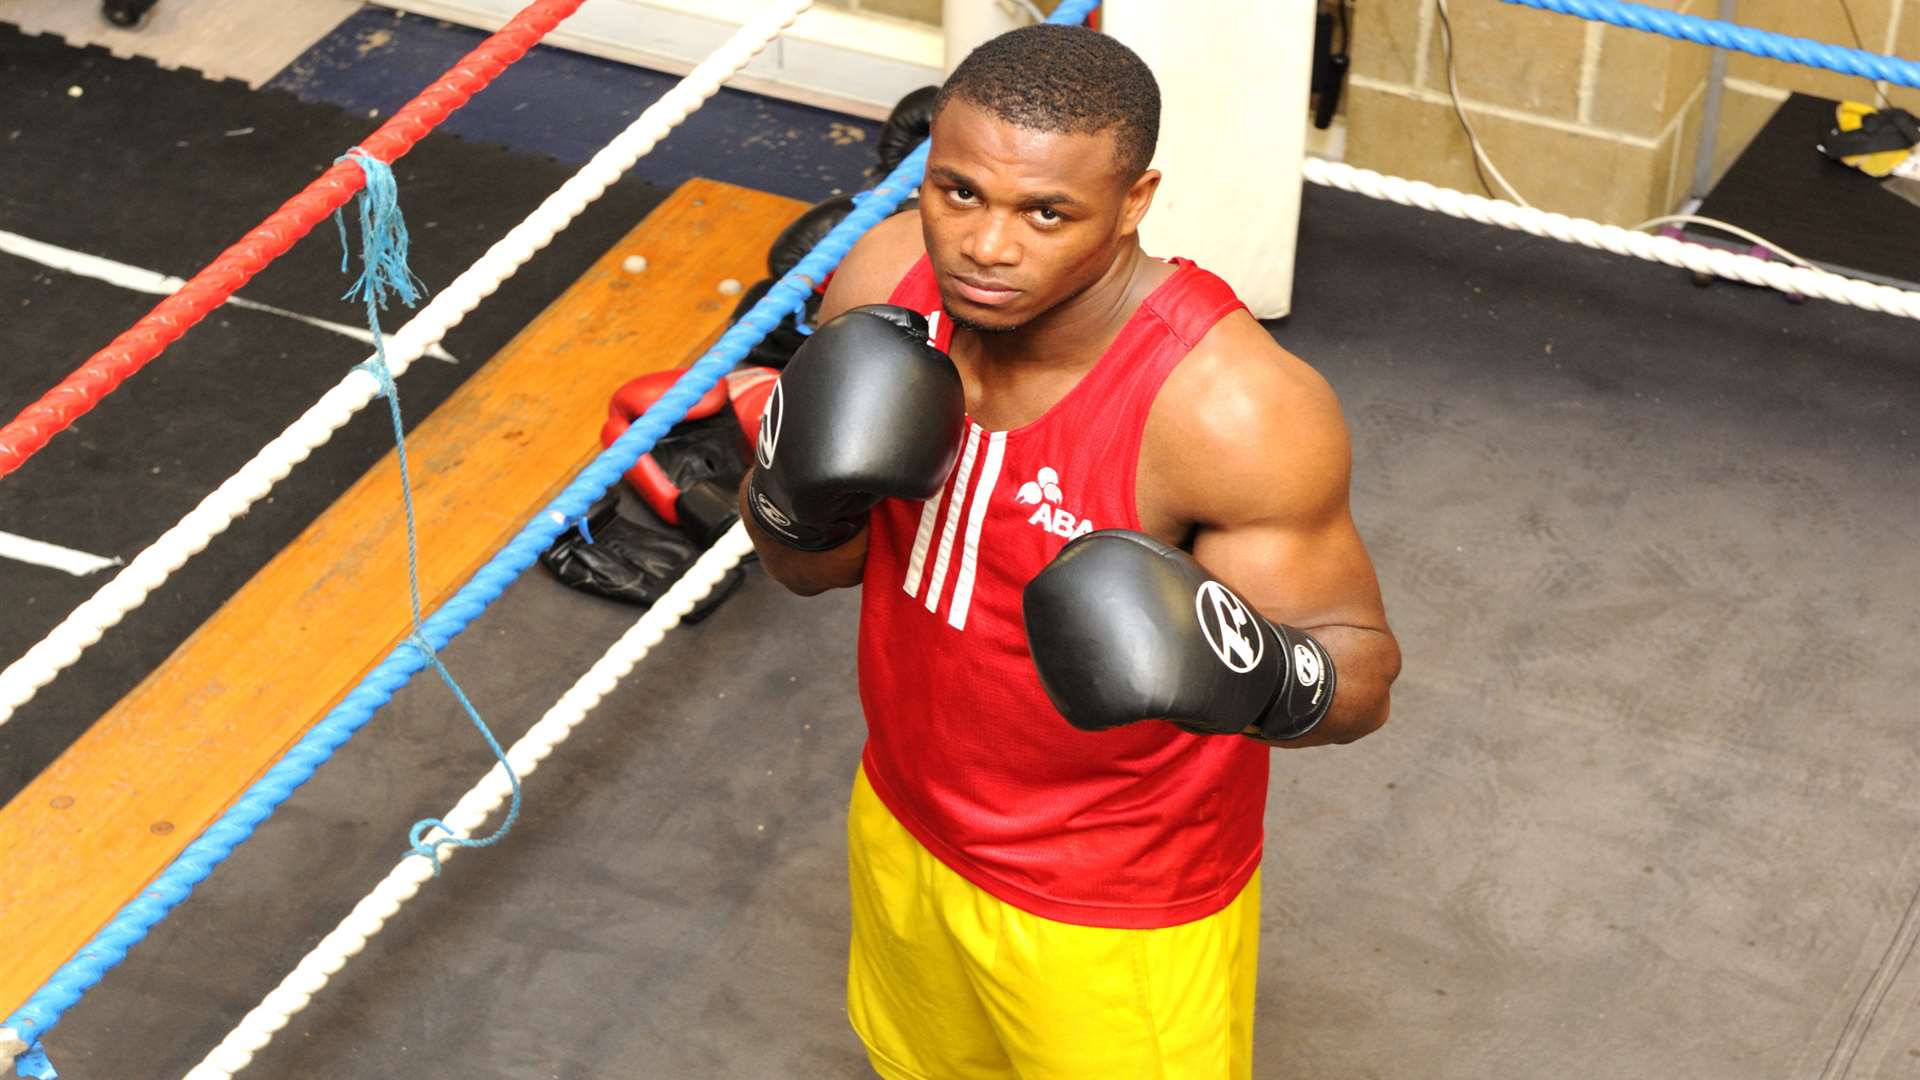 Chev Clarke, an amateur boxer from Northfleet who is hoping to compete at the Commonwealth Games in 2018